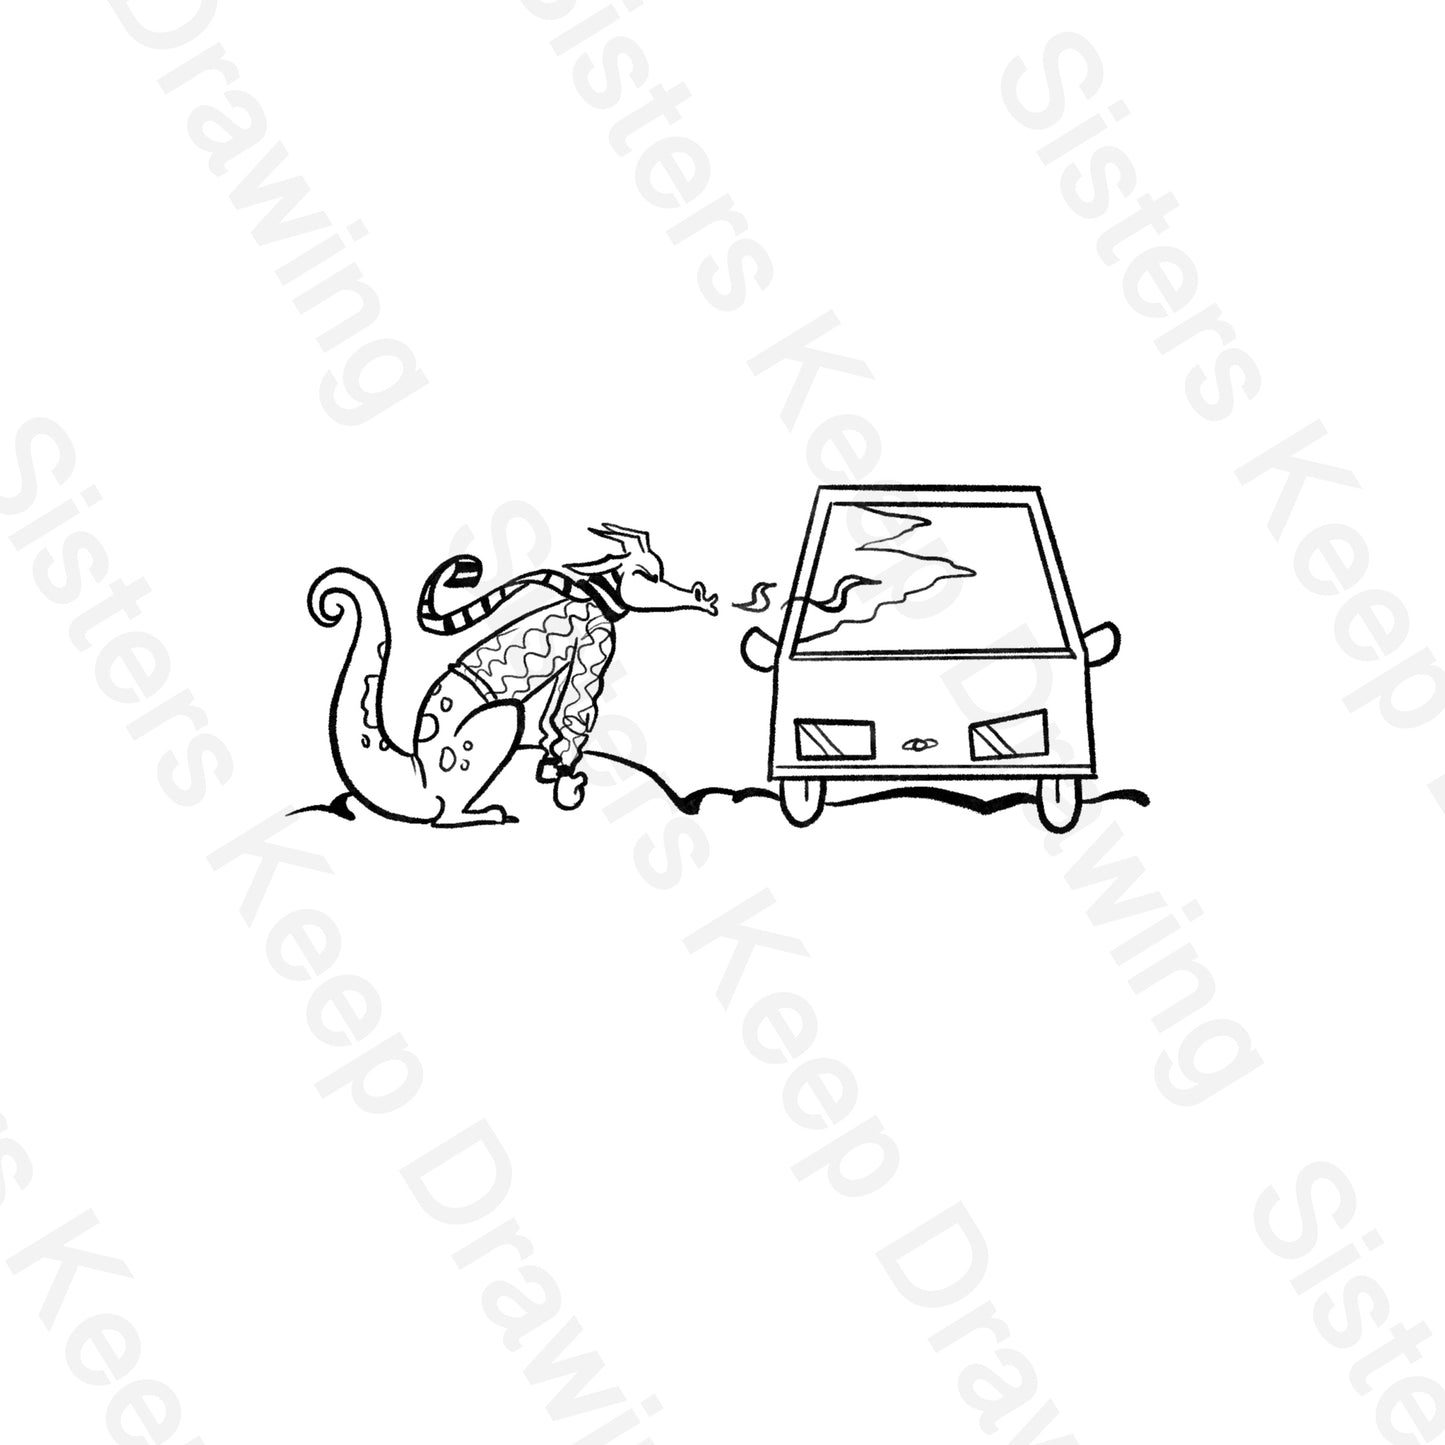 Tiny Dragon uses flame to get ice off his windshield-Tattoo Transparent Permission PNG- instant download digital printable artw